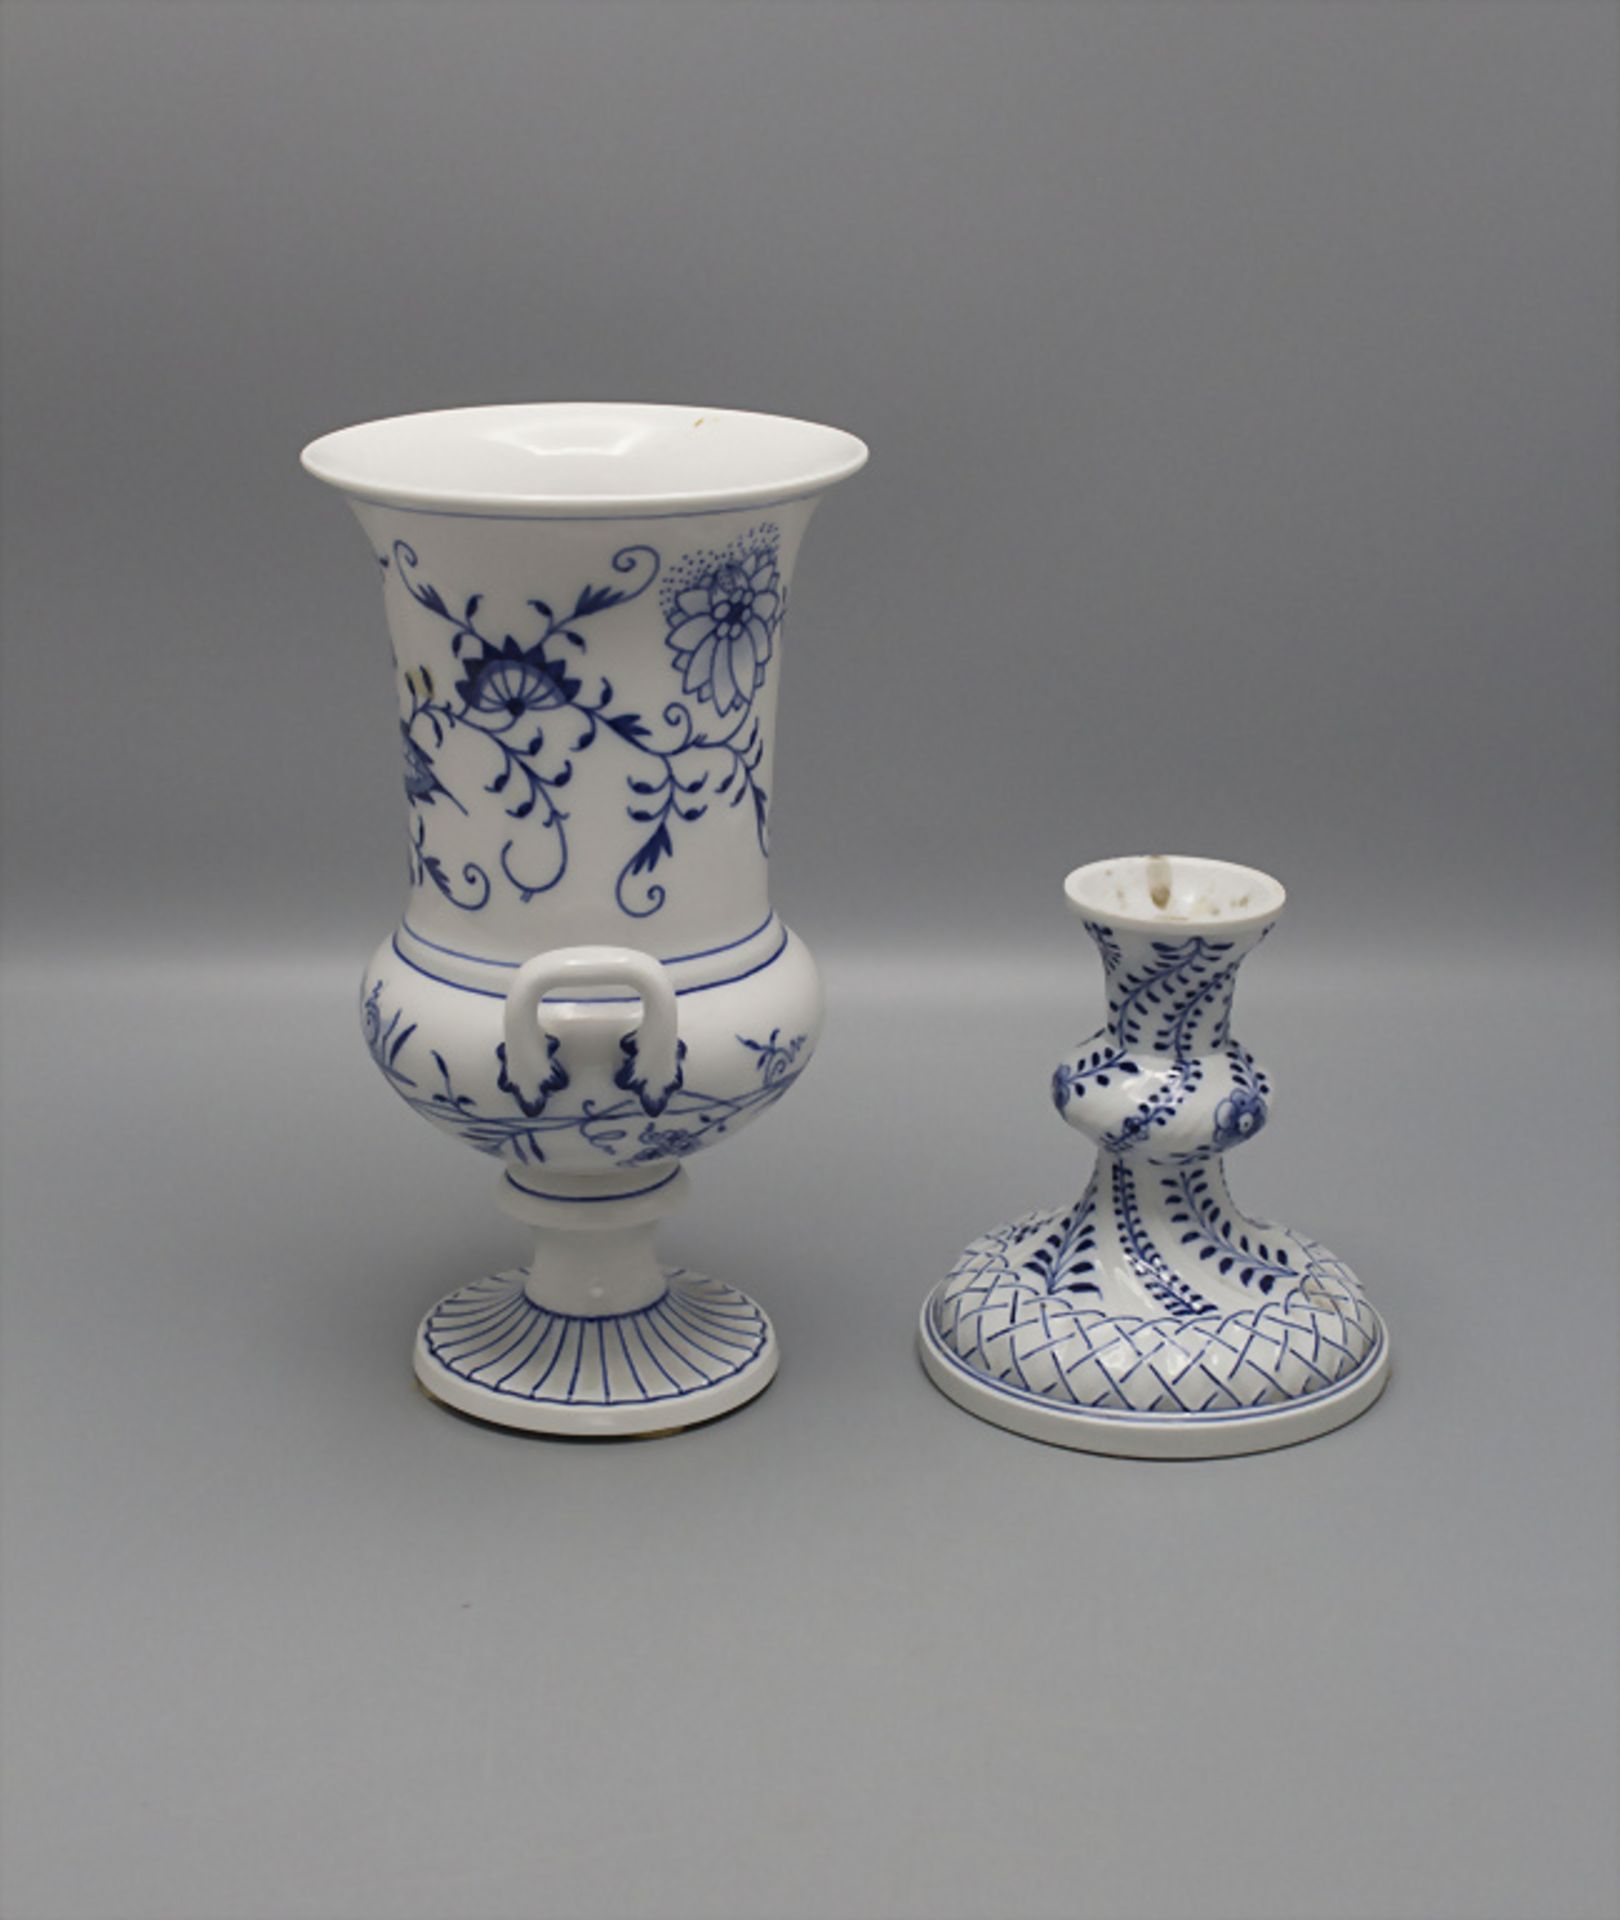 3 Teile Zwiebelmuster / 3 pieces of porcelain with onion pattern, Meissen, 20. Jh. - Image 5 of 6